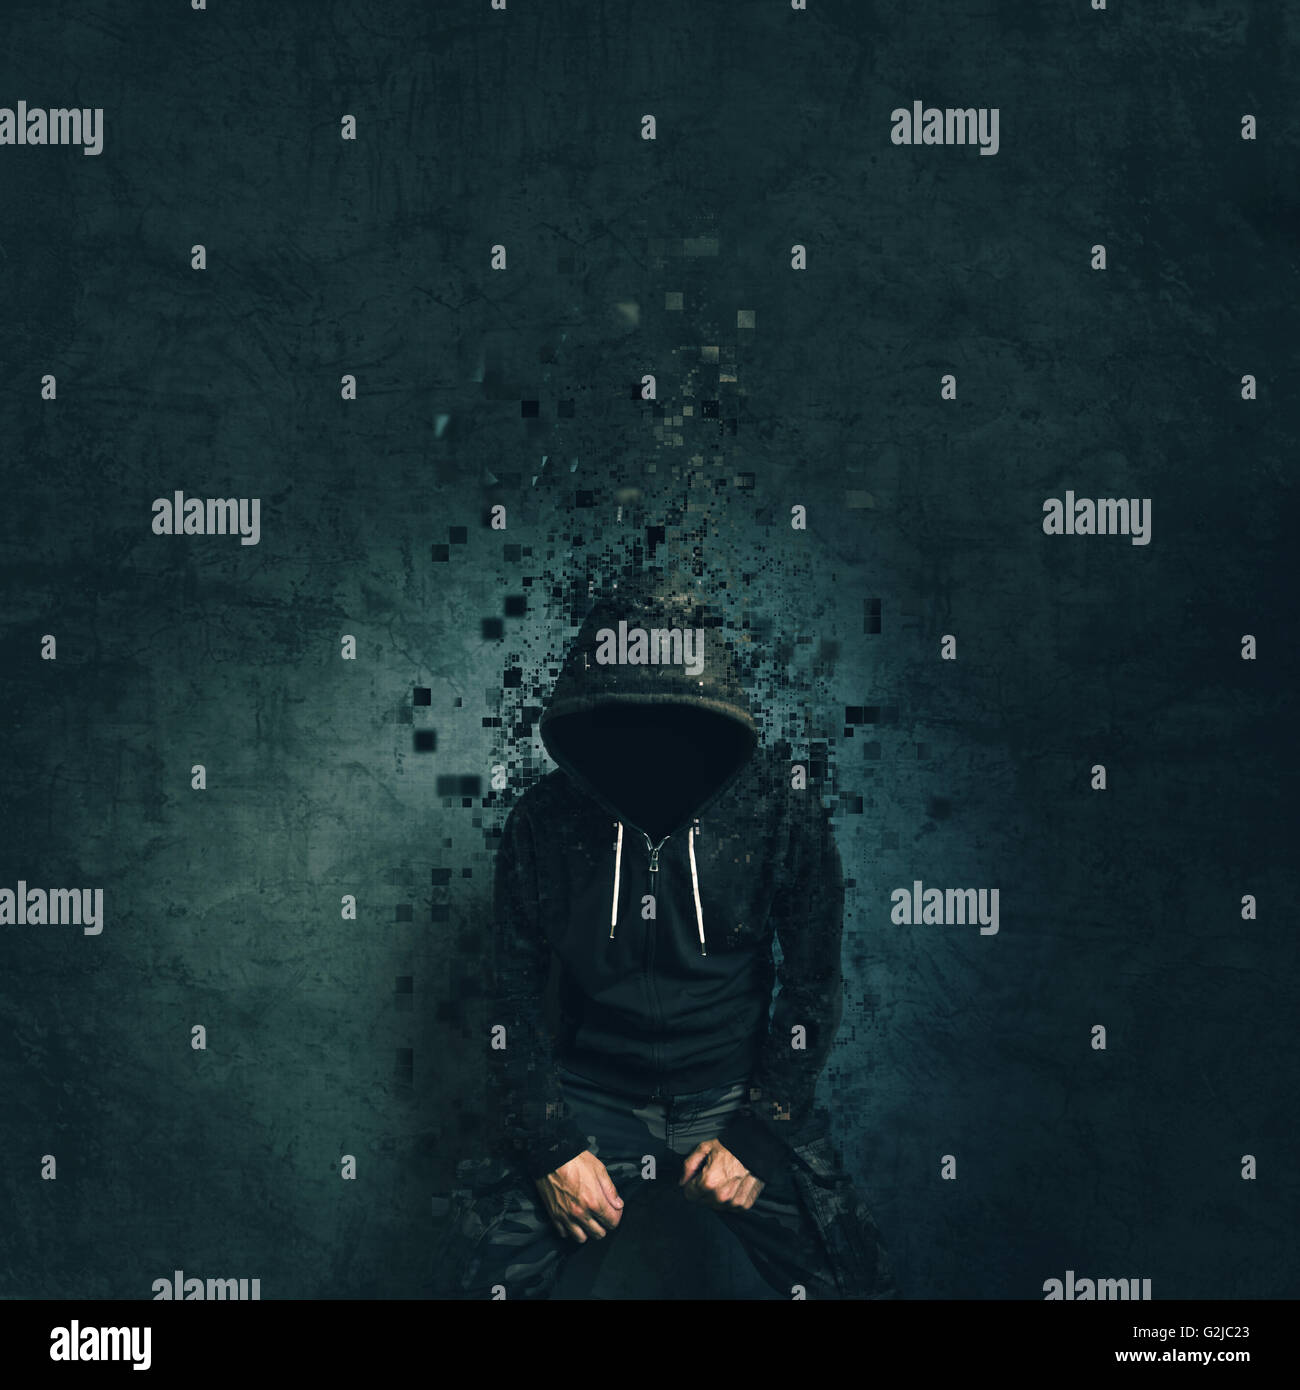 Spooky evil criminal person with hooded jacket dissolving in front of concrete wall. Stock Photo